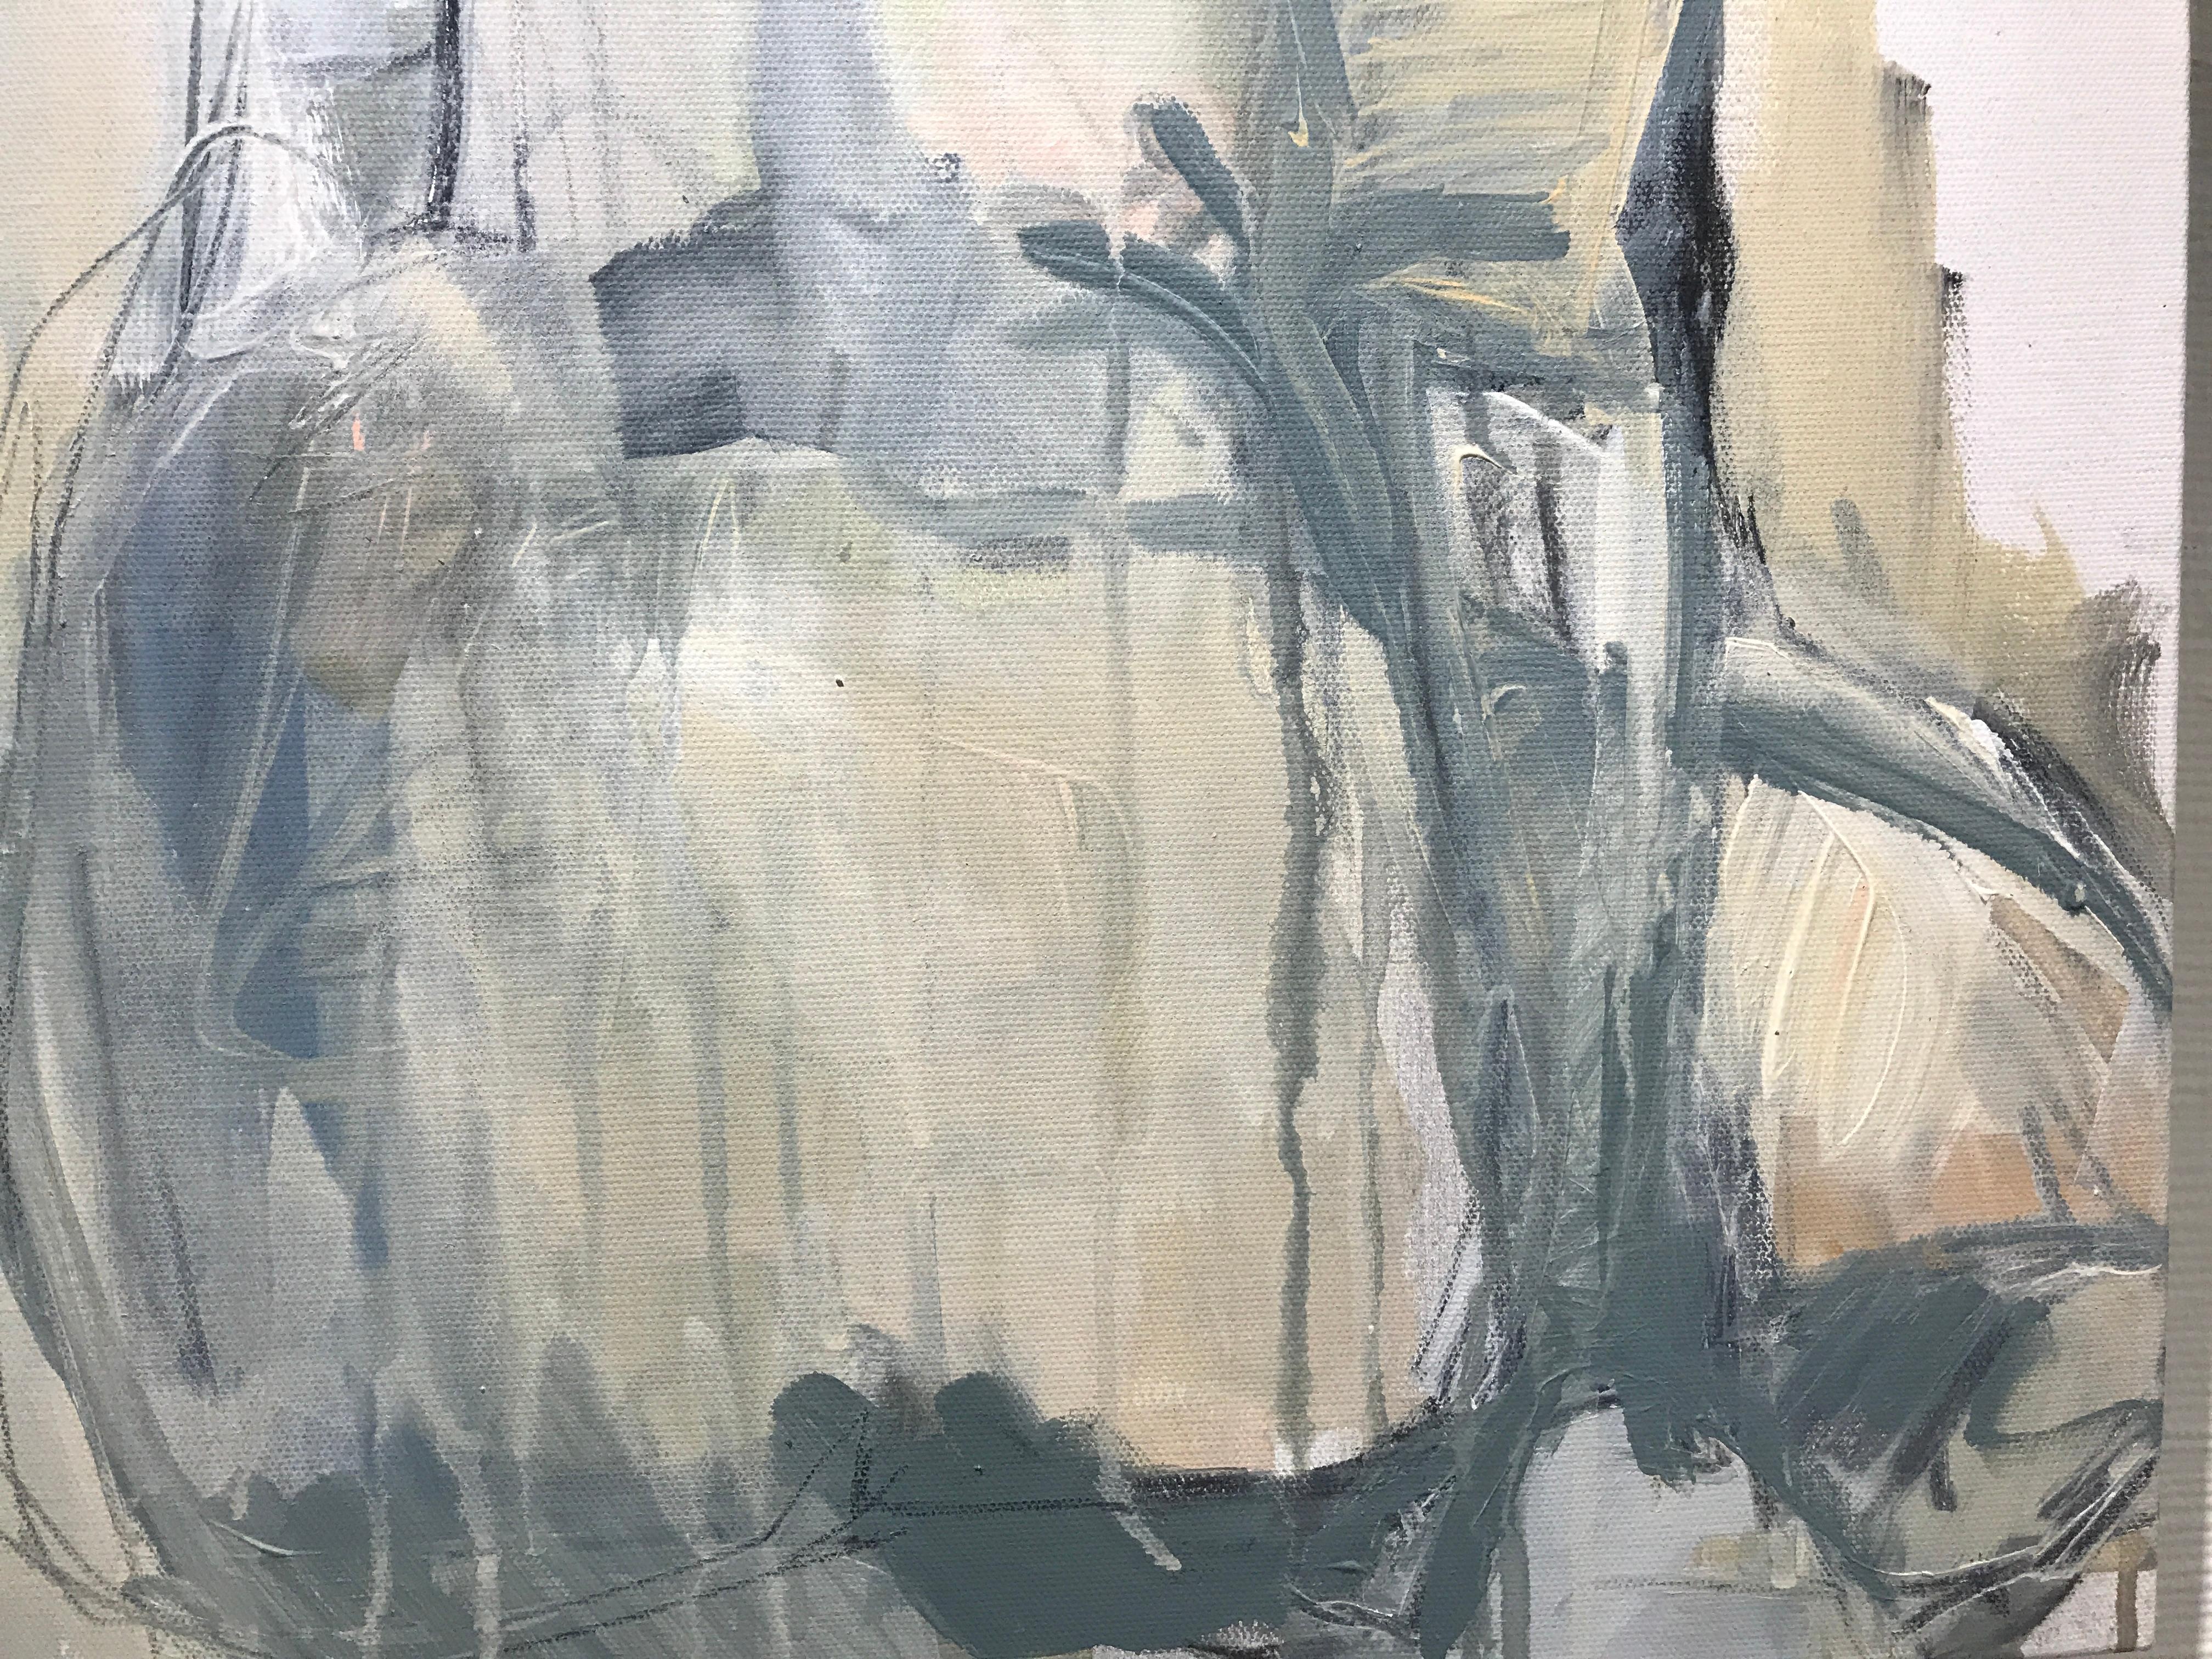 'Nothing More' is a medium size mixed media on canvas abstracted nude painting of vertical format, created by American artist Kelley Ogburn in 2018. Featuring a soft palette mostly made of grey, blue, white, cream and pink tones, the painting